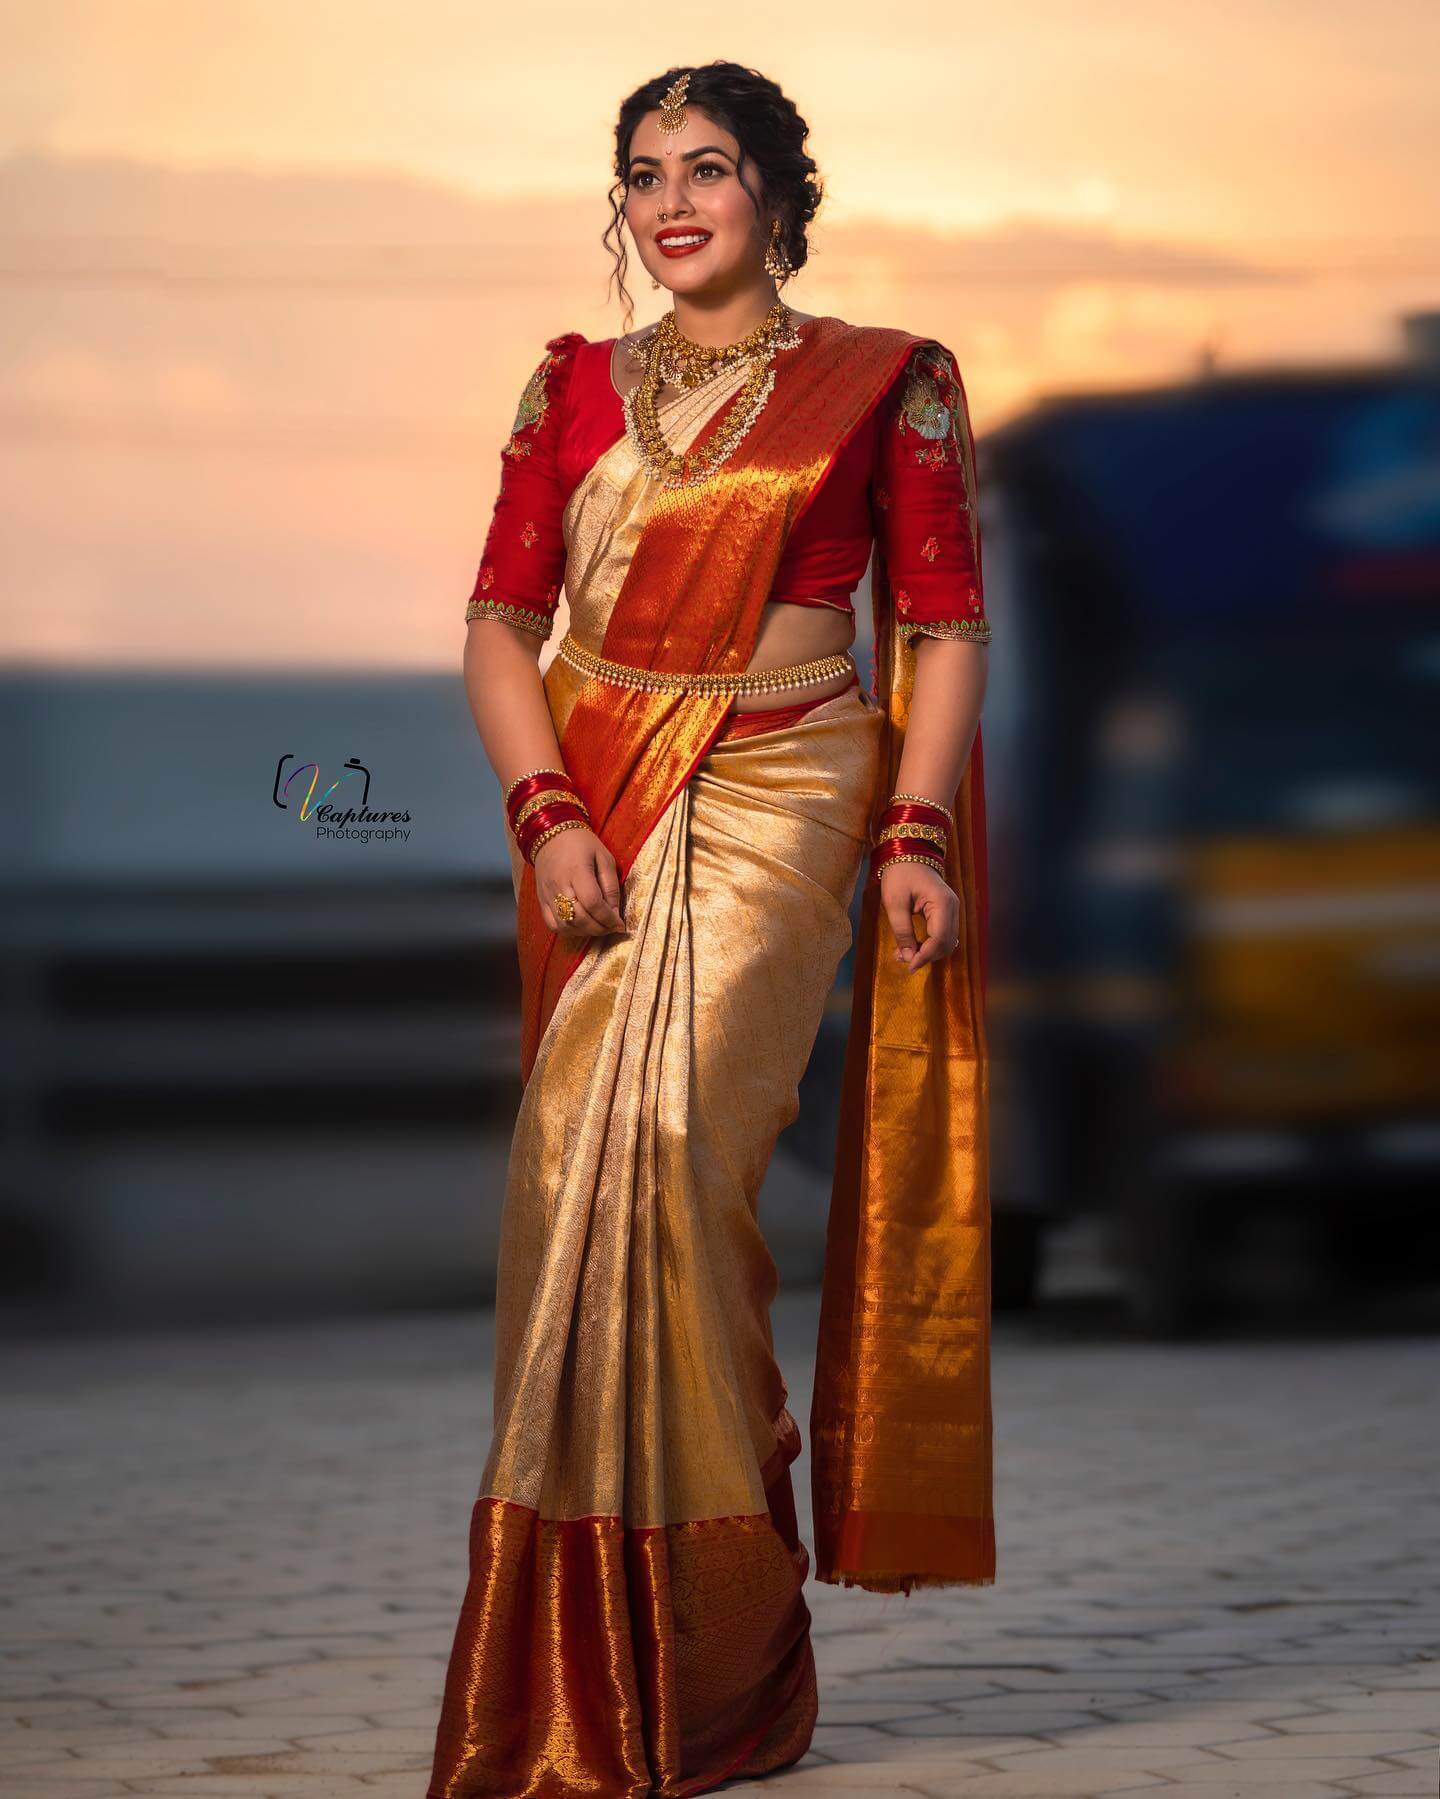 Shamna Kasim Slaying The South Indian Look In Golden & Red Kanjeevaram Saree With Gold Temple Design Jewellery